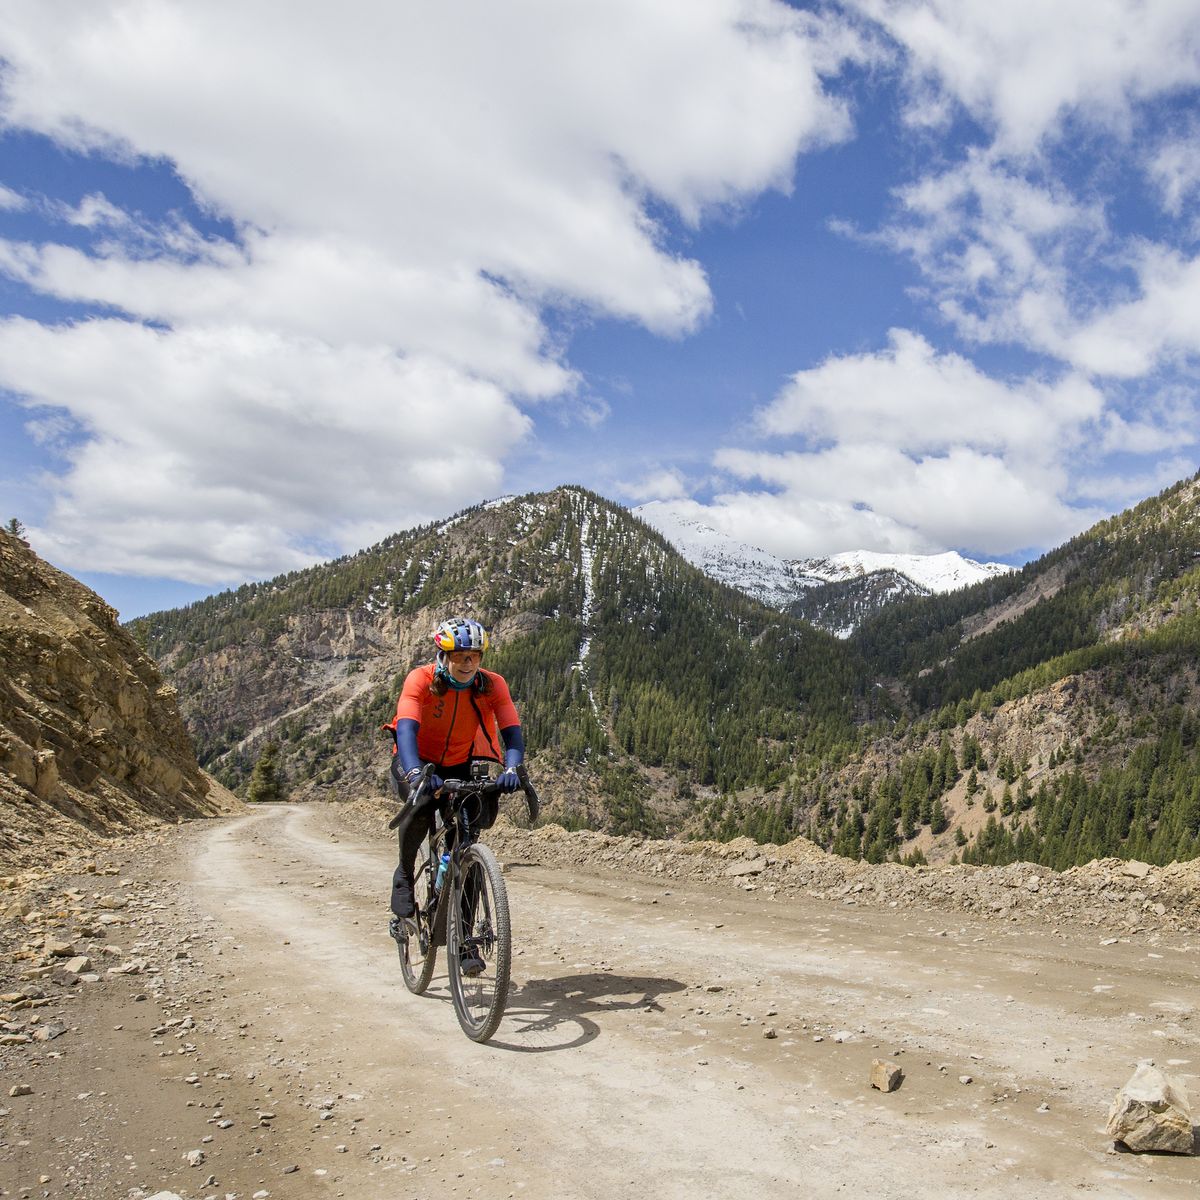 rebecca rusch rides  in ketchum, id, usa on 24 may, 2020  wyatt caldwell  red bull content pool  si202012160554  usage for editorial use only